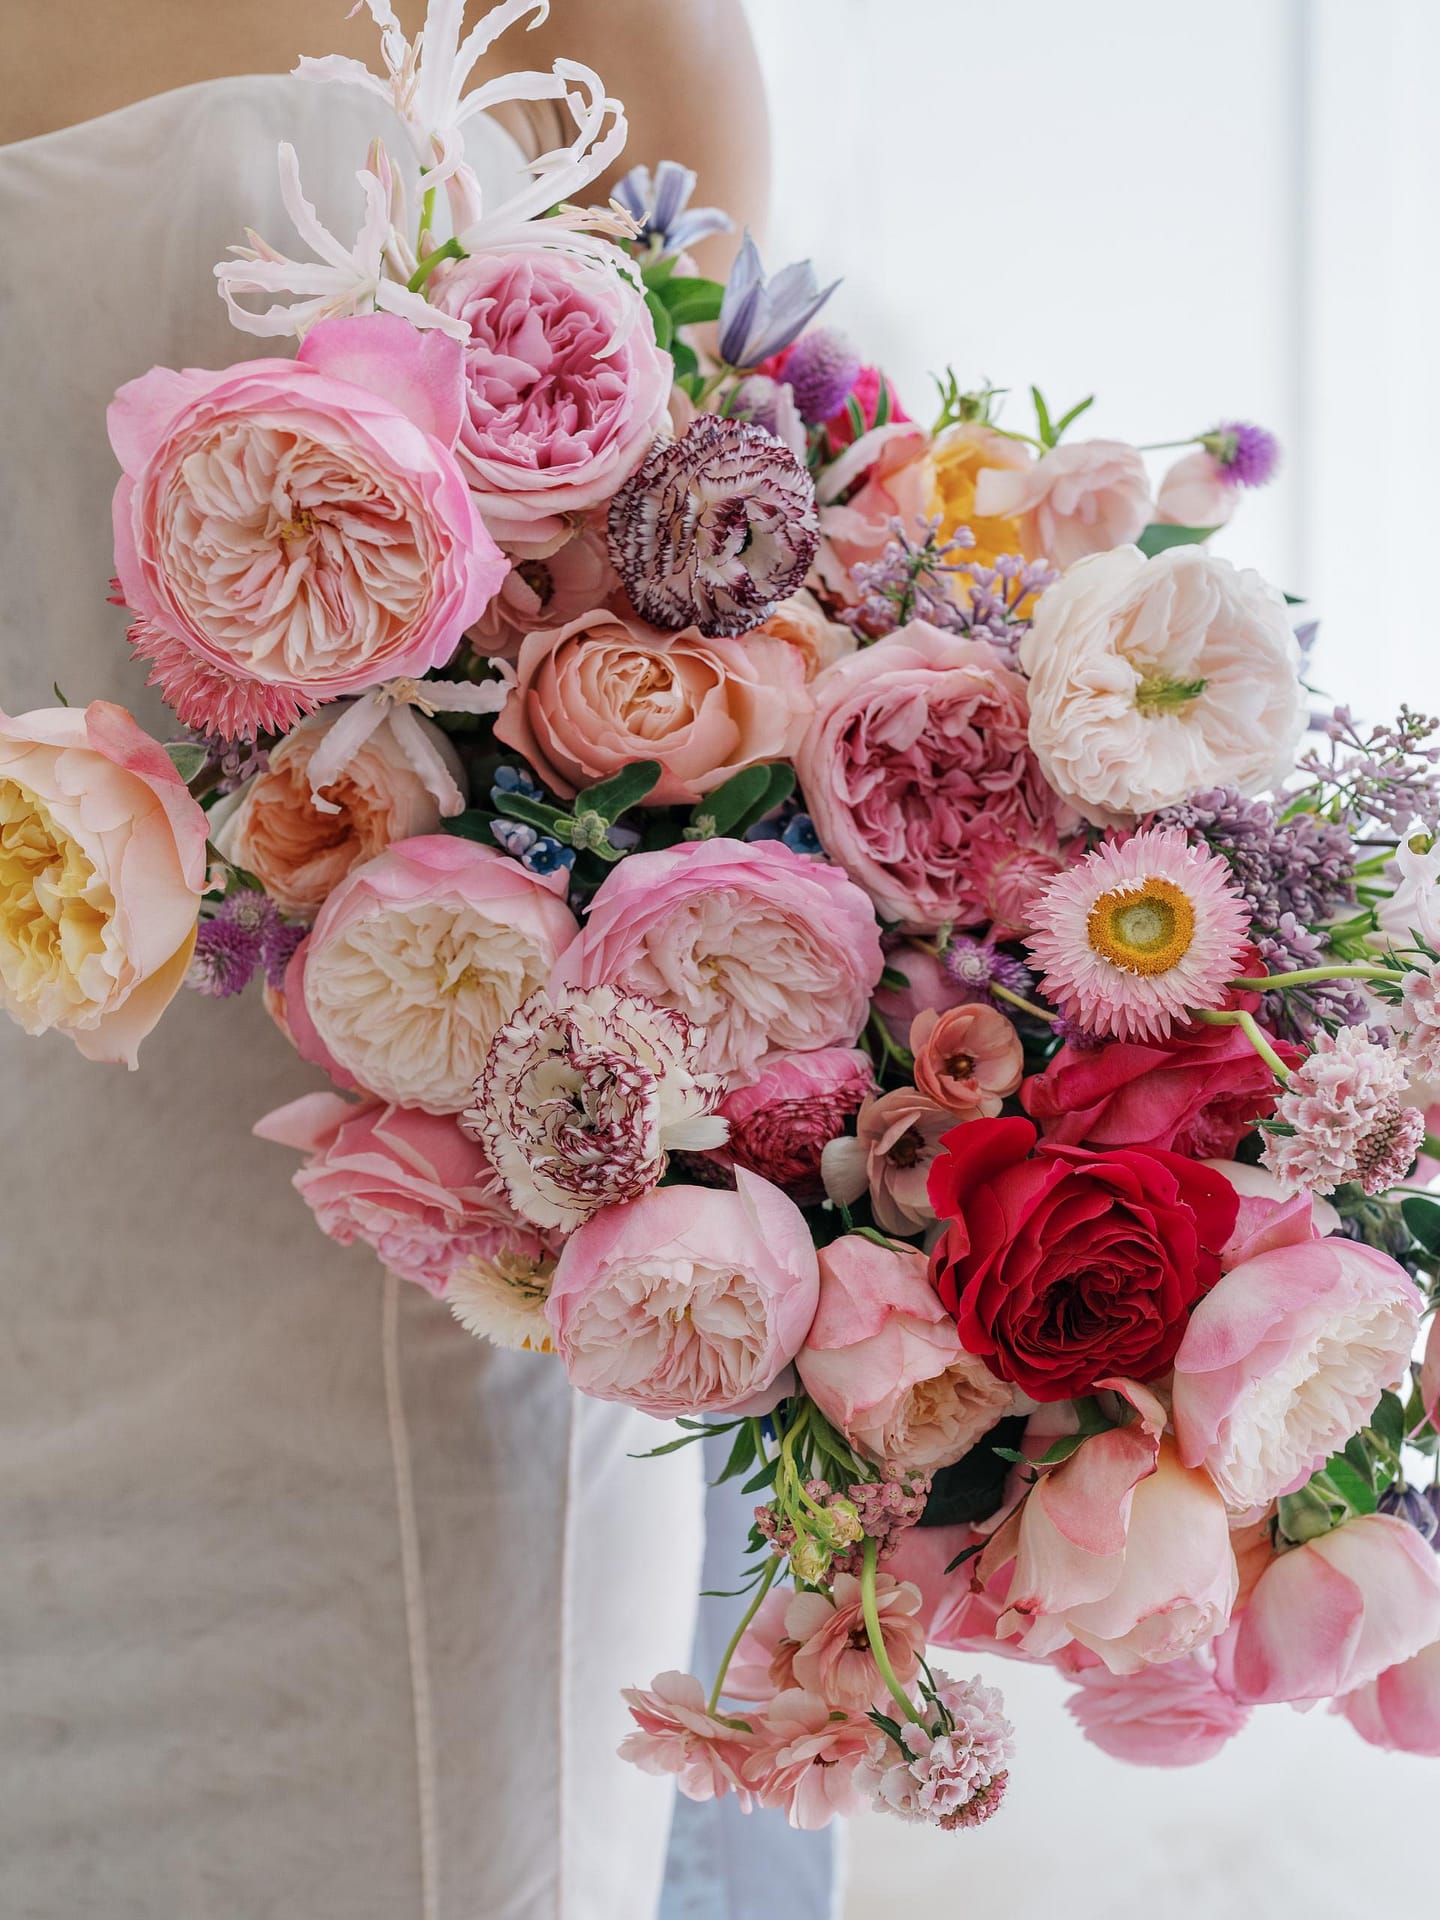 5 Pretty Colour Combinations For Your Wedding David Austin Wedding And Event Roses 3958